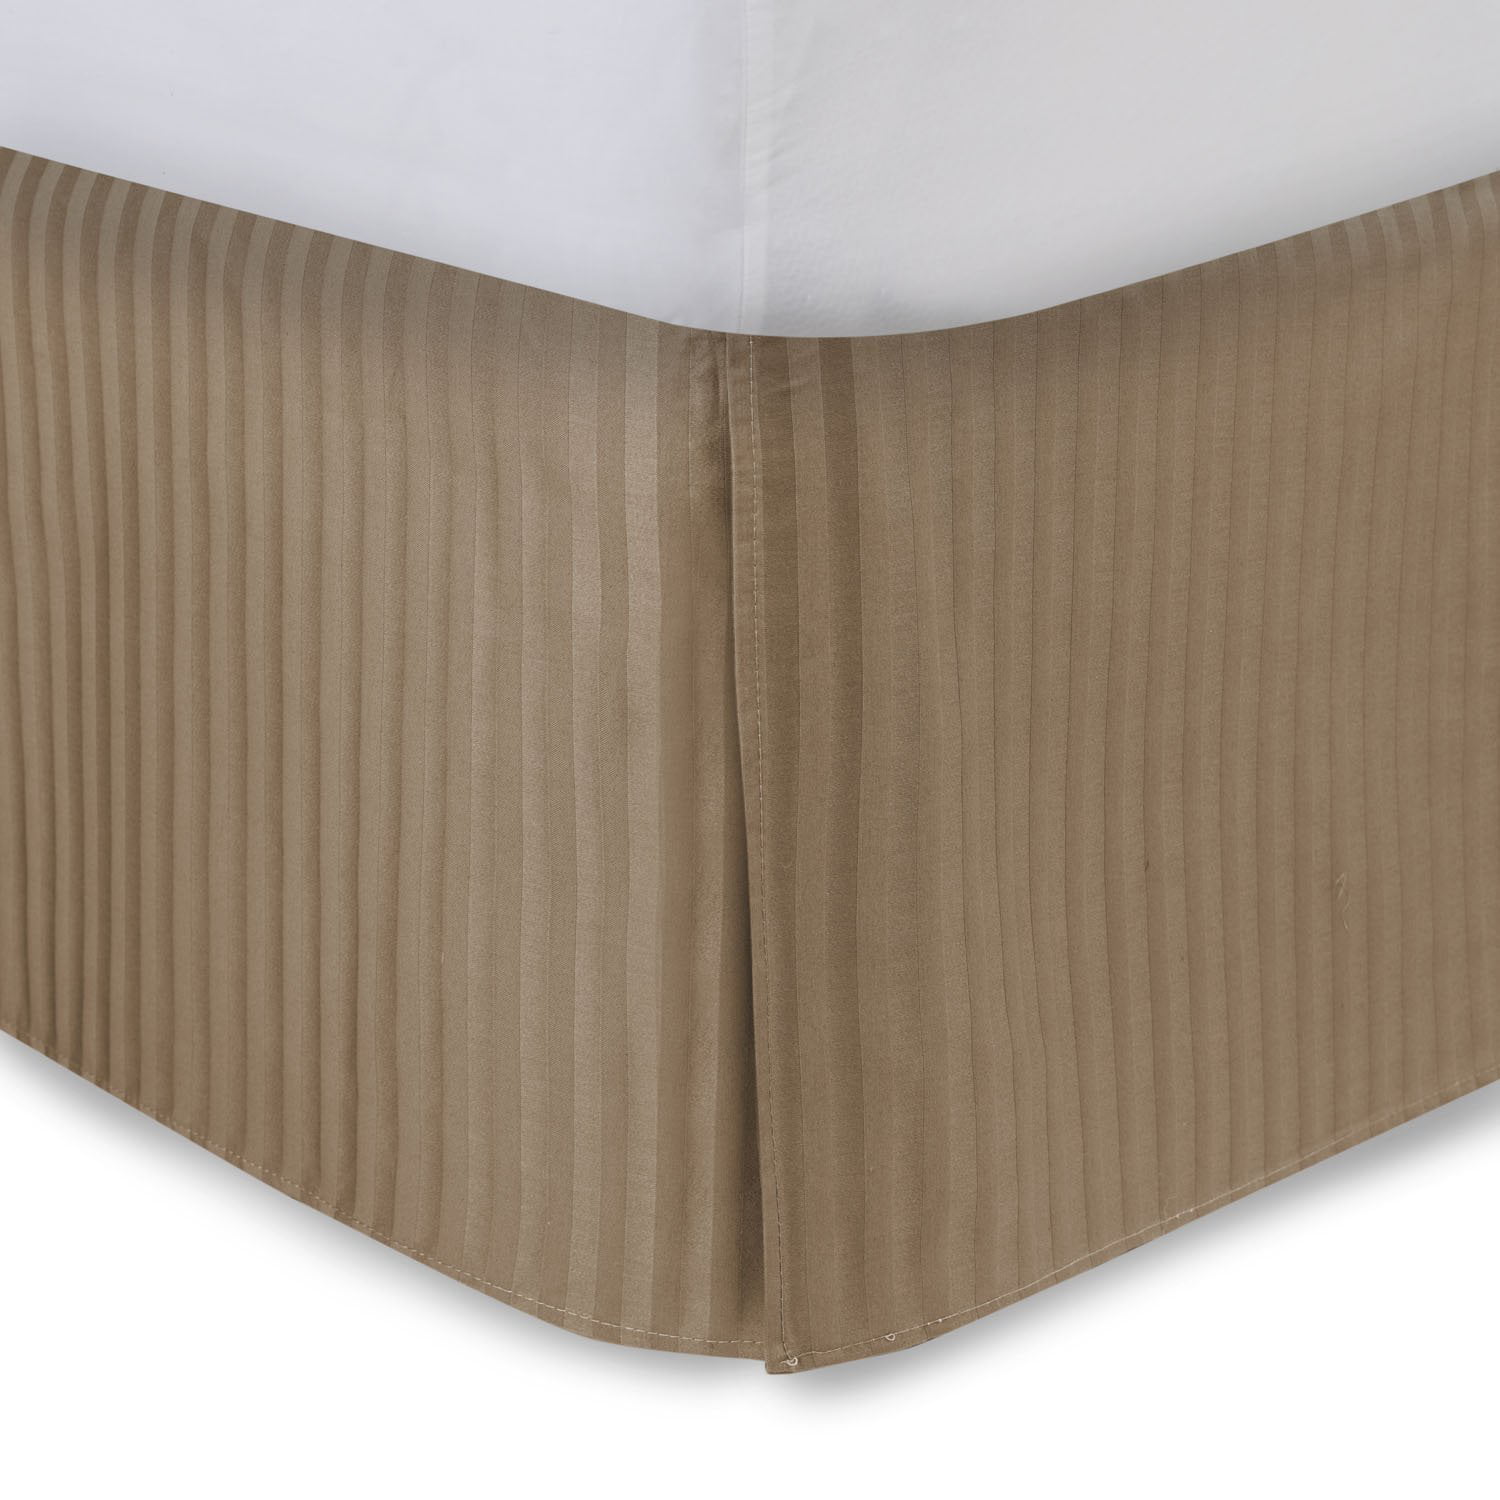 King Size Burgundy Sateen Strip Harmony Lane Tailored Bedskirt with 21" Drop 